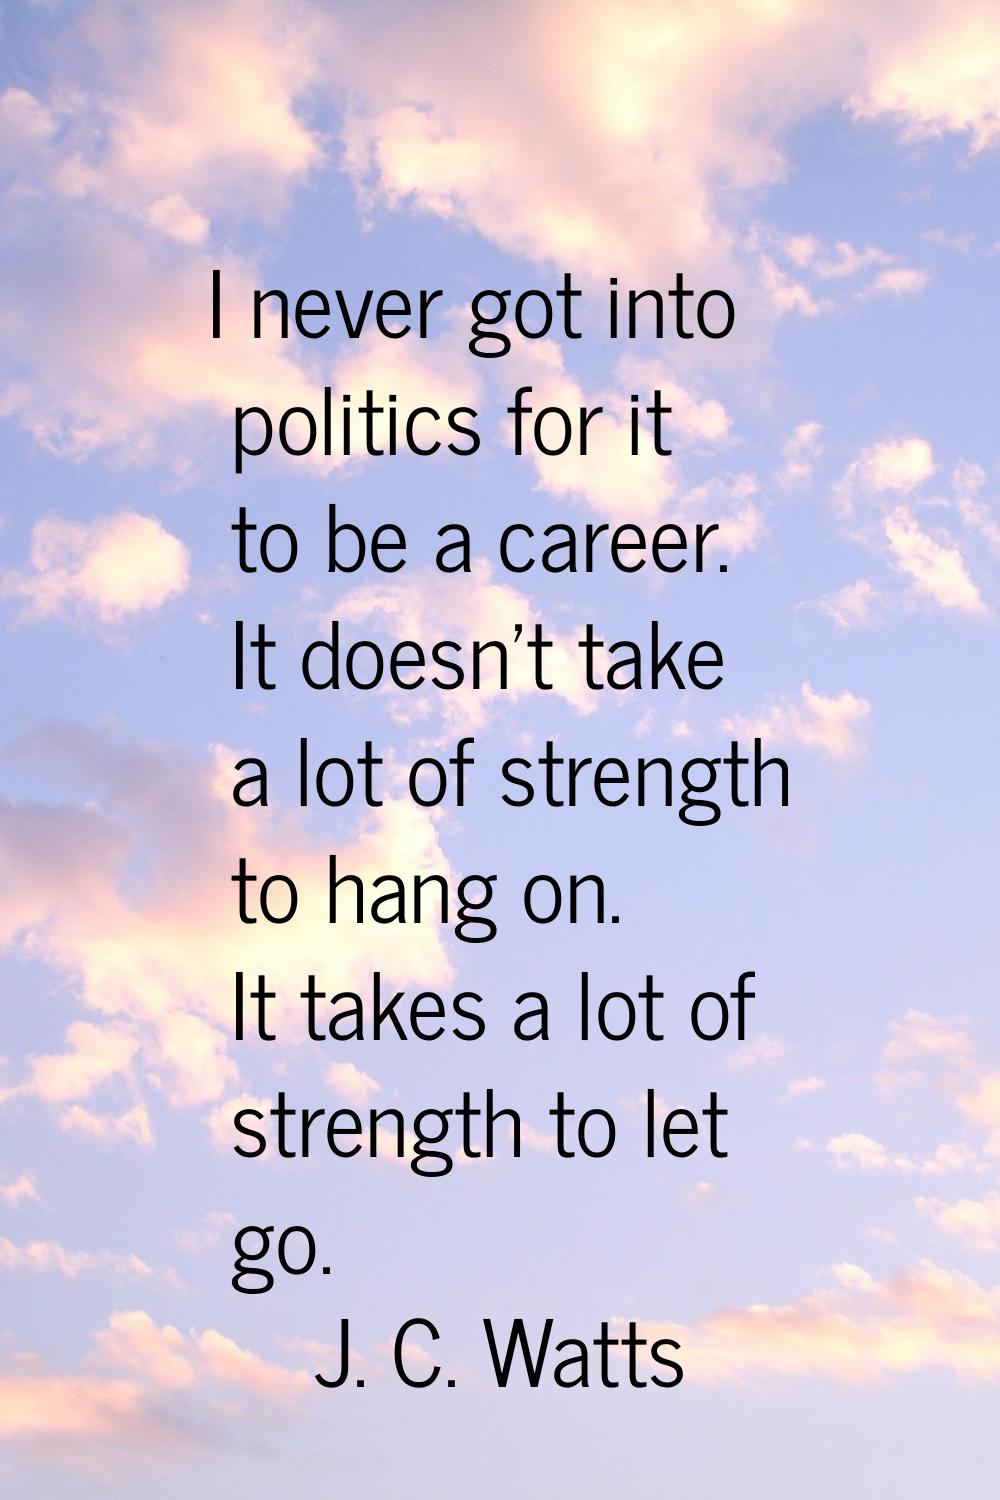 I never got into politics for it to be a career. It doesn't take a lot of strength to hang on. It t